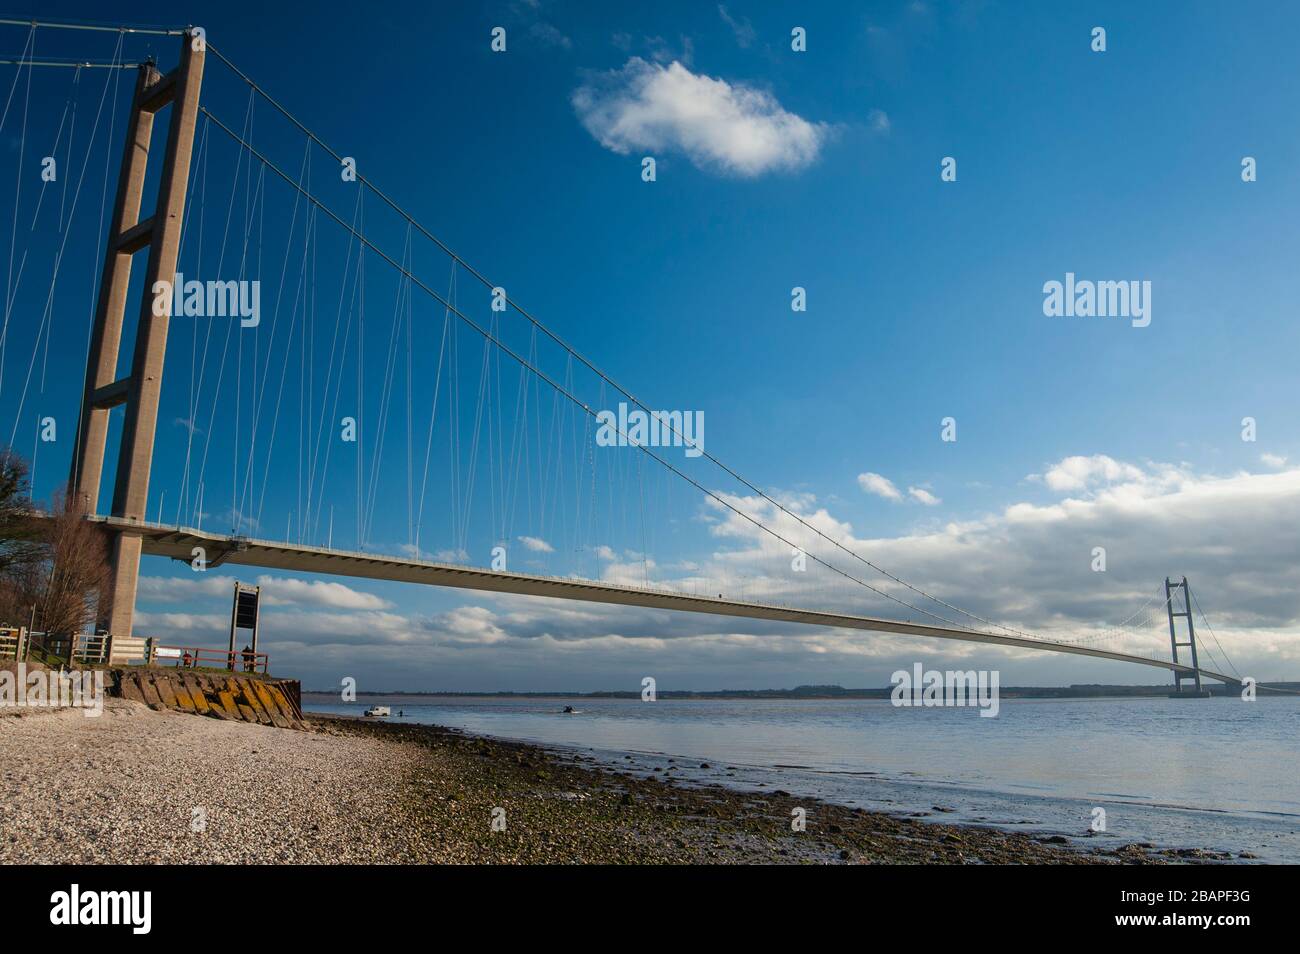 Large suspension bridge spanning a wide river estuary on a clear day with blue sky and clouds Stock Photo